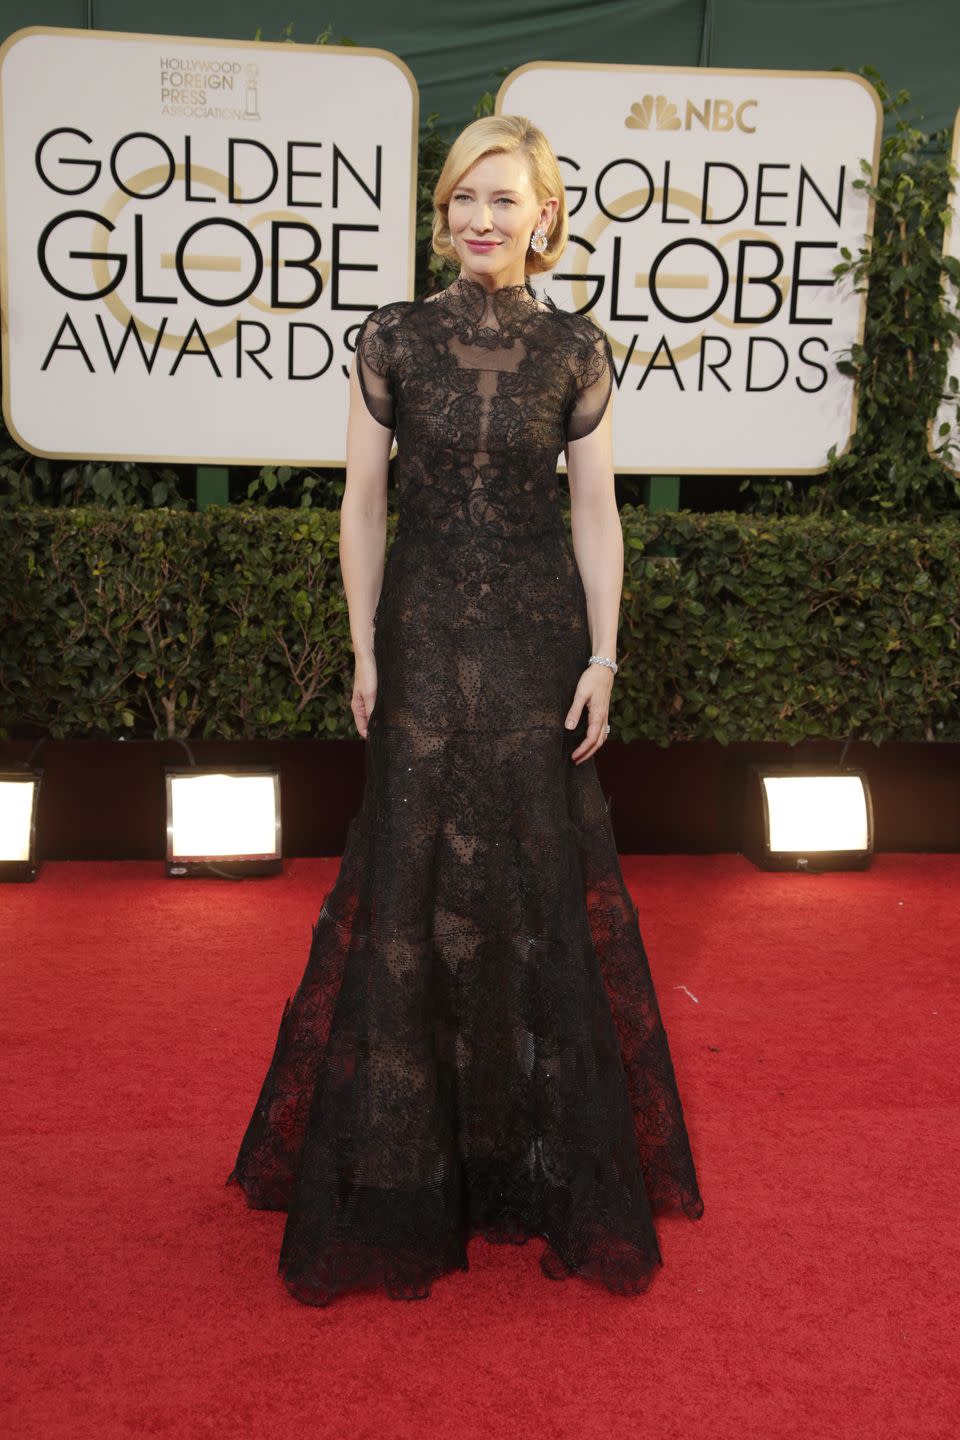 beverly hills, ca january 12 actress cate blanchett attends the 71st annual golden globe awards held at the beverly hilton hotel on january 12, 2014 in beverly hills, california photo by jeff vespawireimage